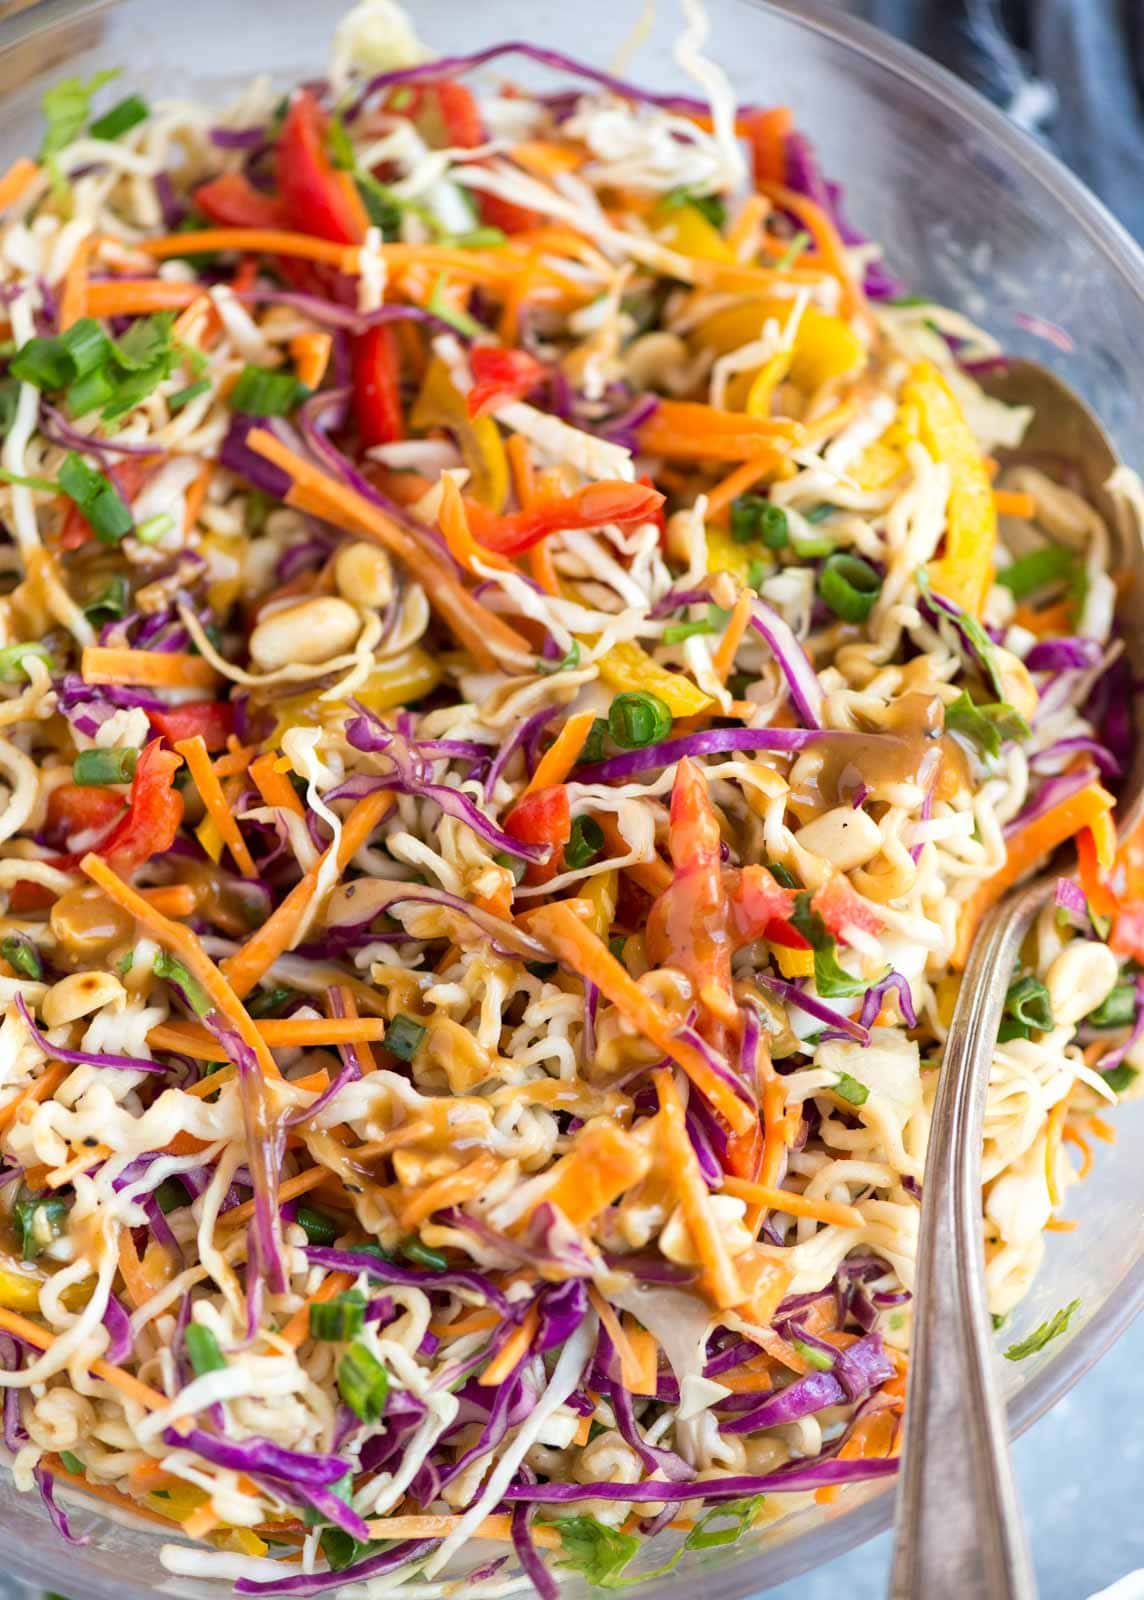 Ramen Noodle Salad with asian peanut dressing after mixed in a bowl.